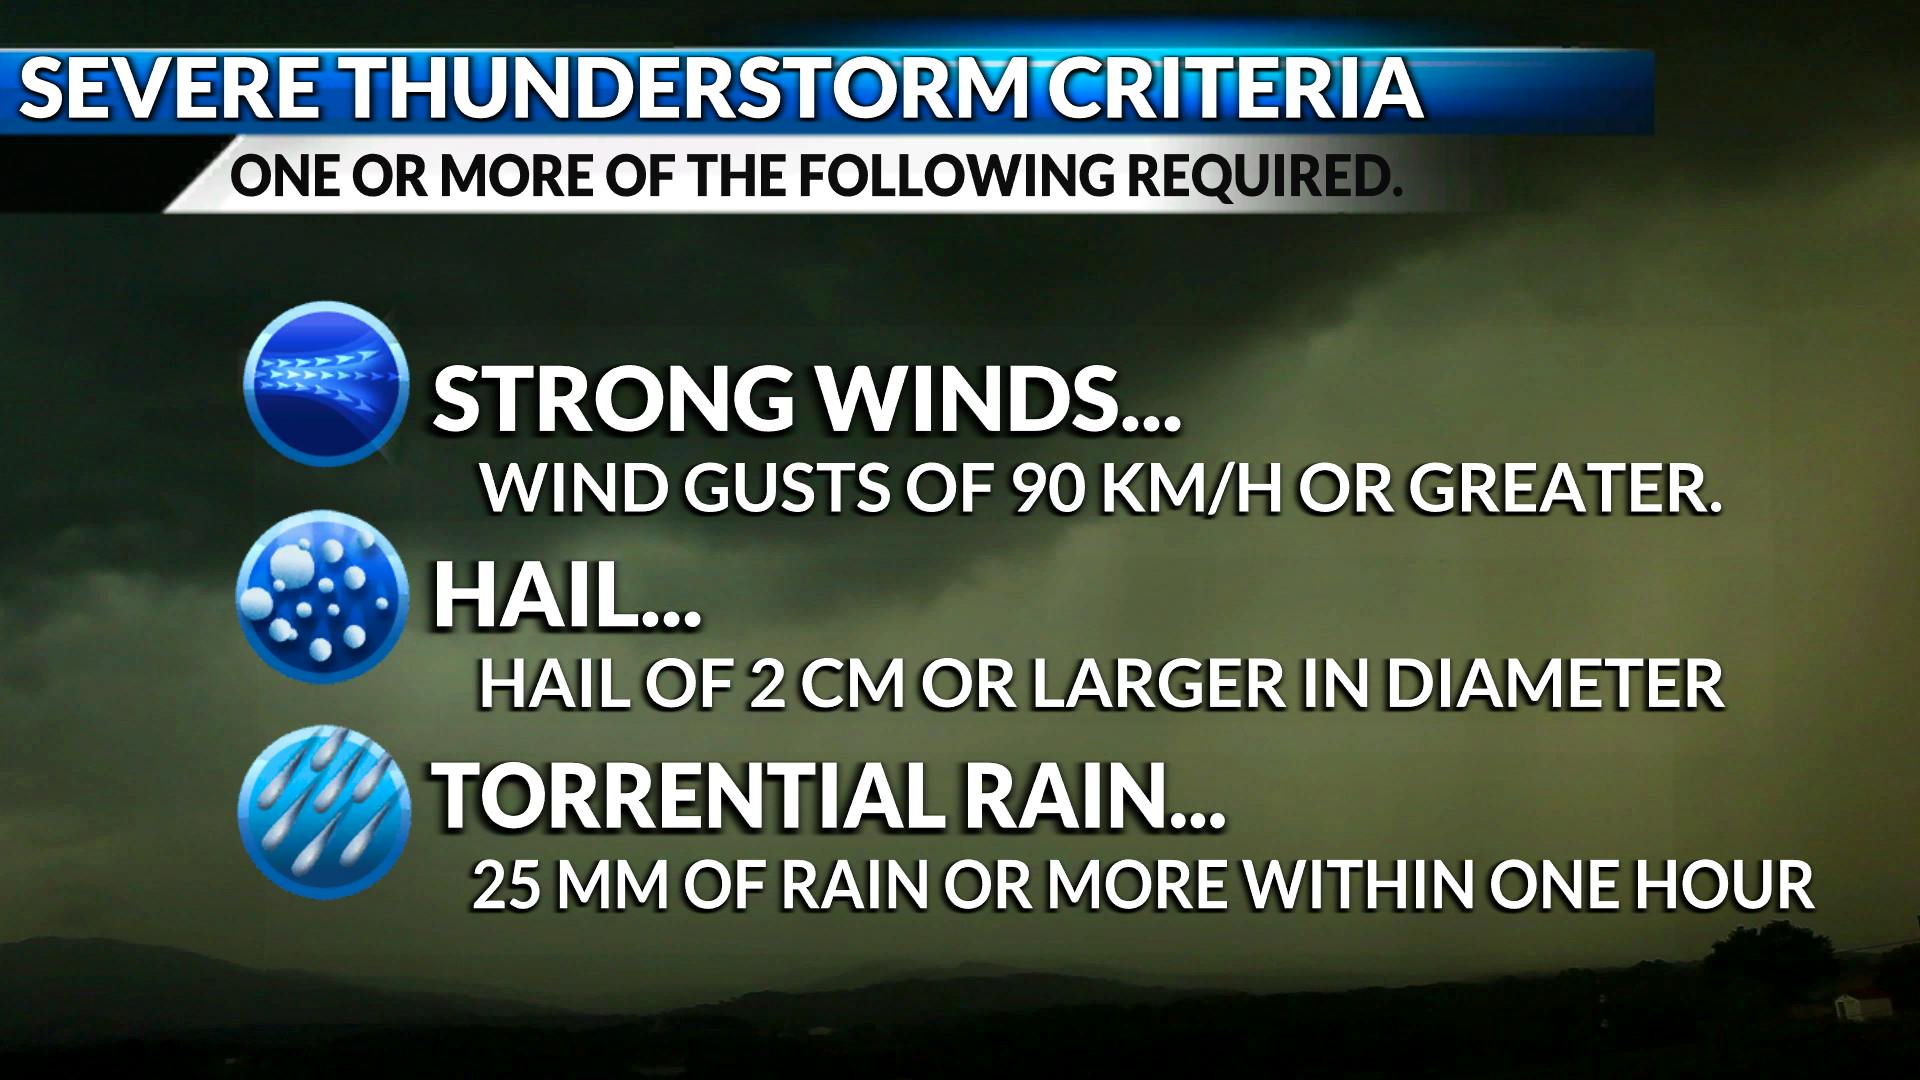 The criteria for severe thunderstorms in Atlantic Canada, set by Environment Canada.